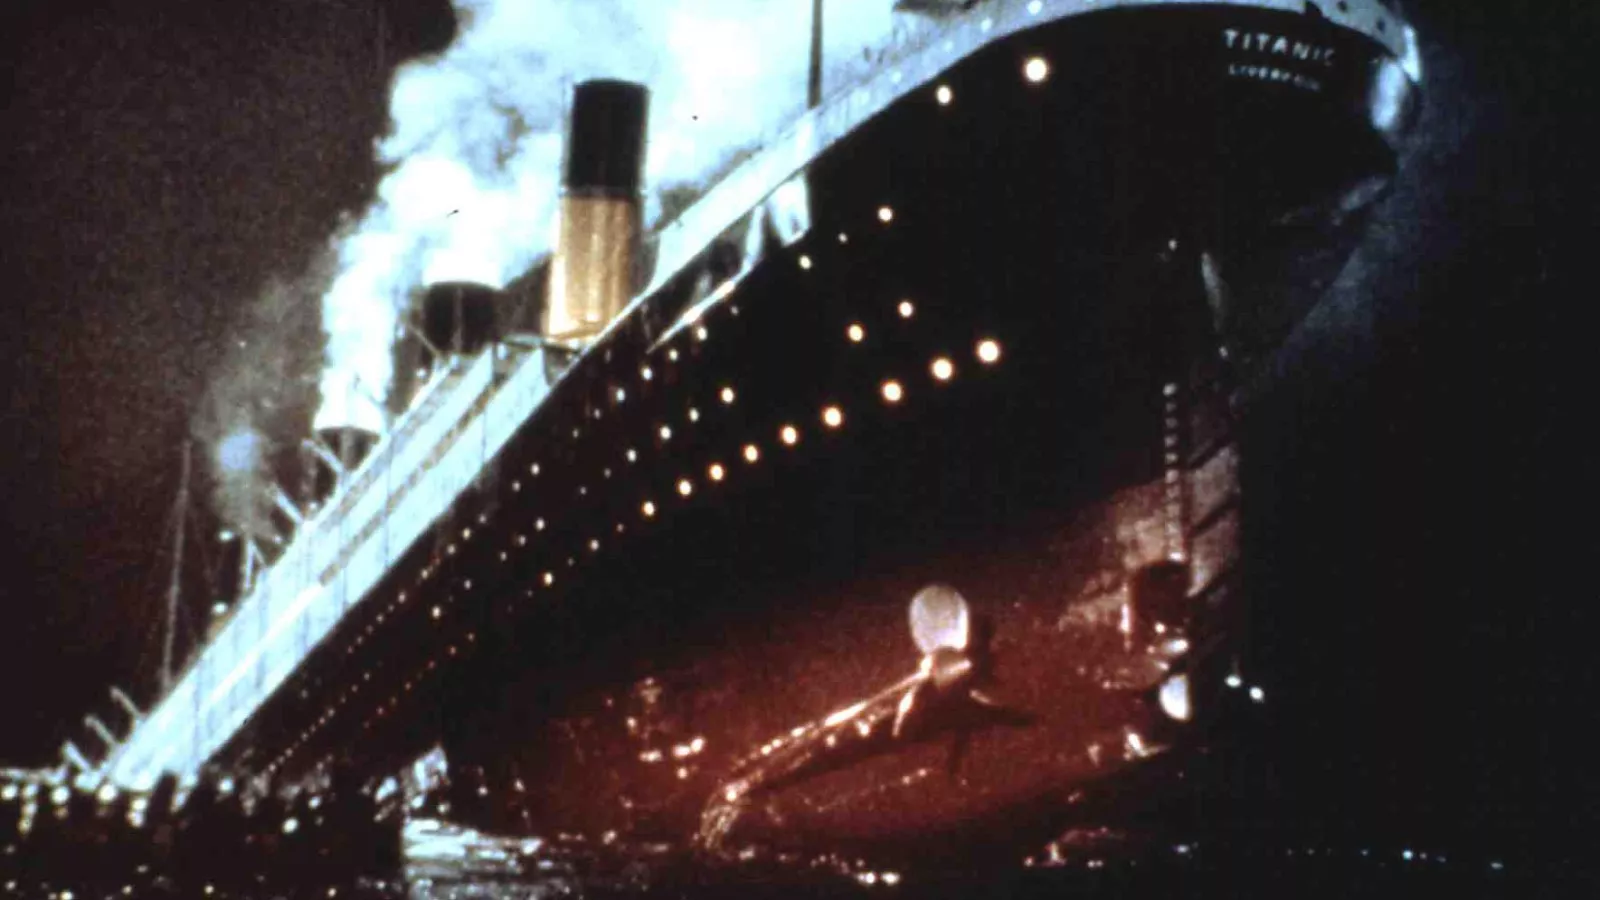 The Titanic: How many people died and how many survived.